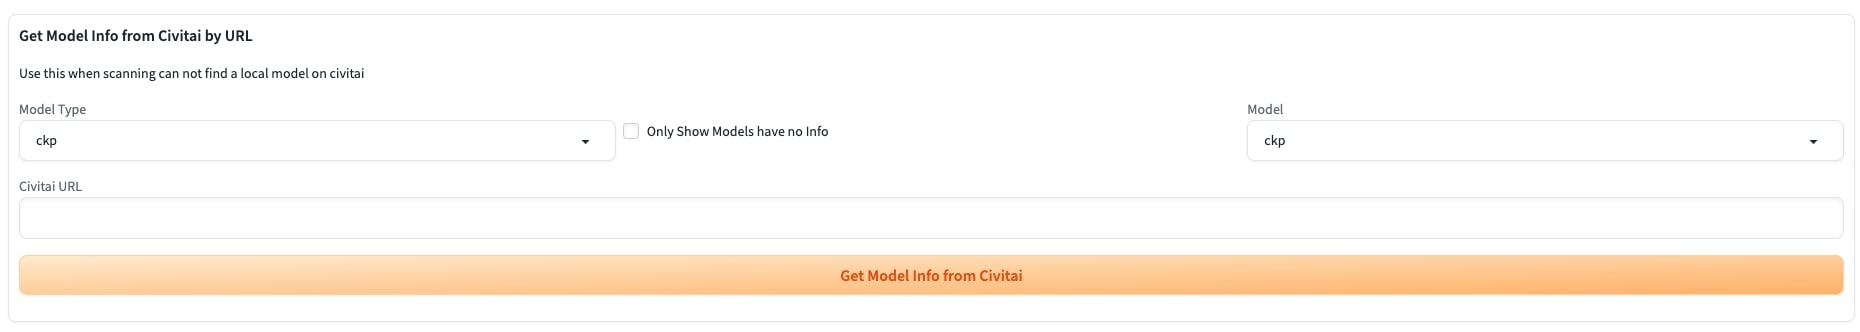 Get Model Info from Civitai by URL